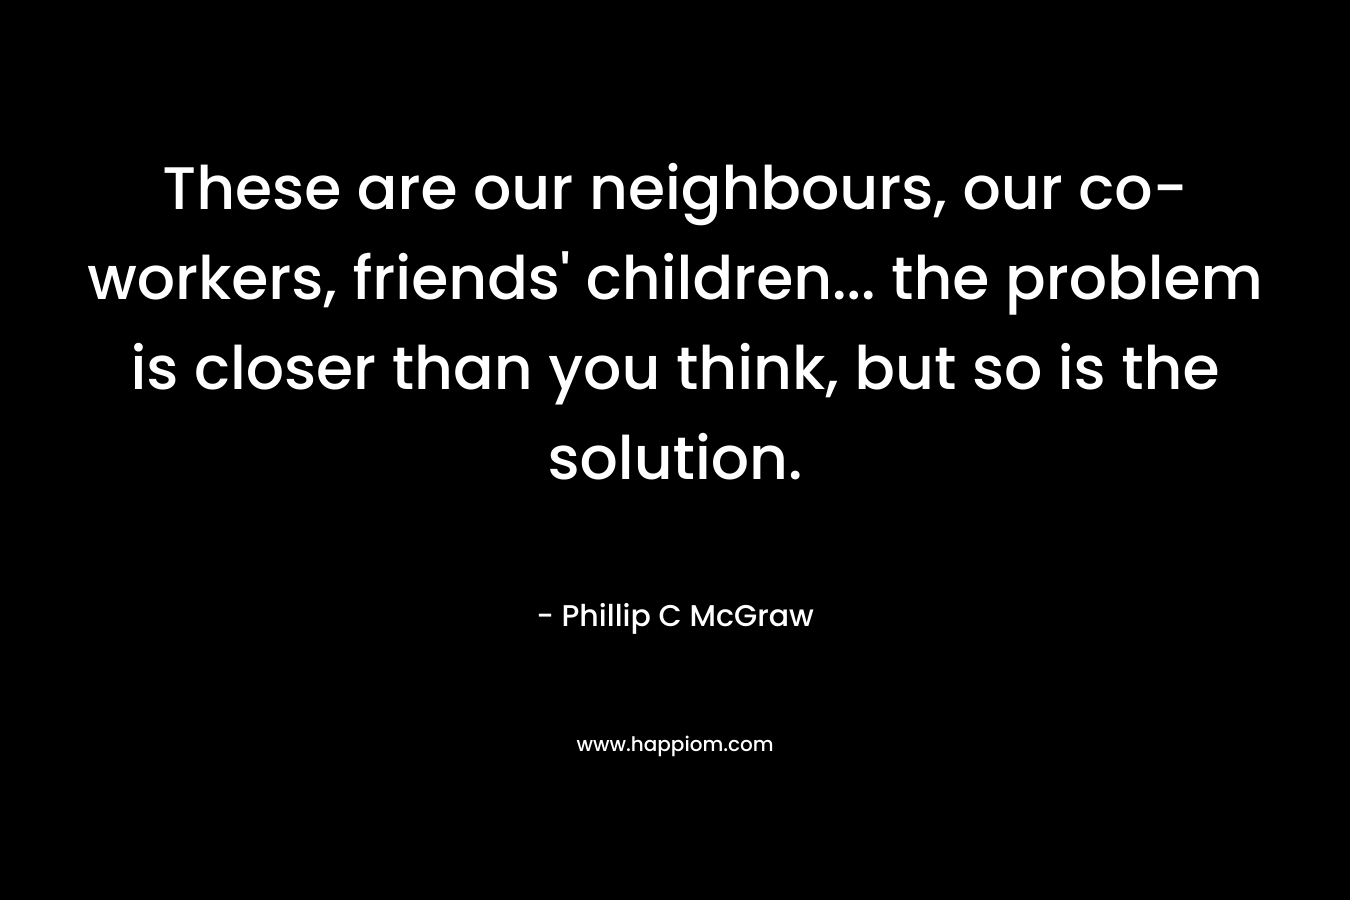 These are our neighbours, our co-workers, friends' children... the problem is closer than you think, but so is the solution.